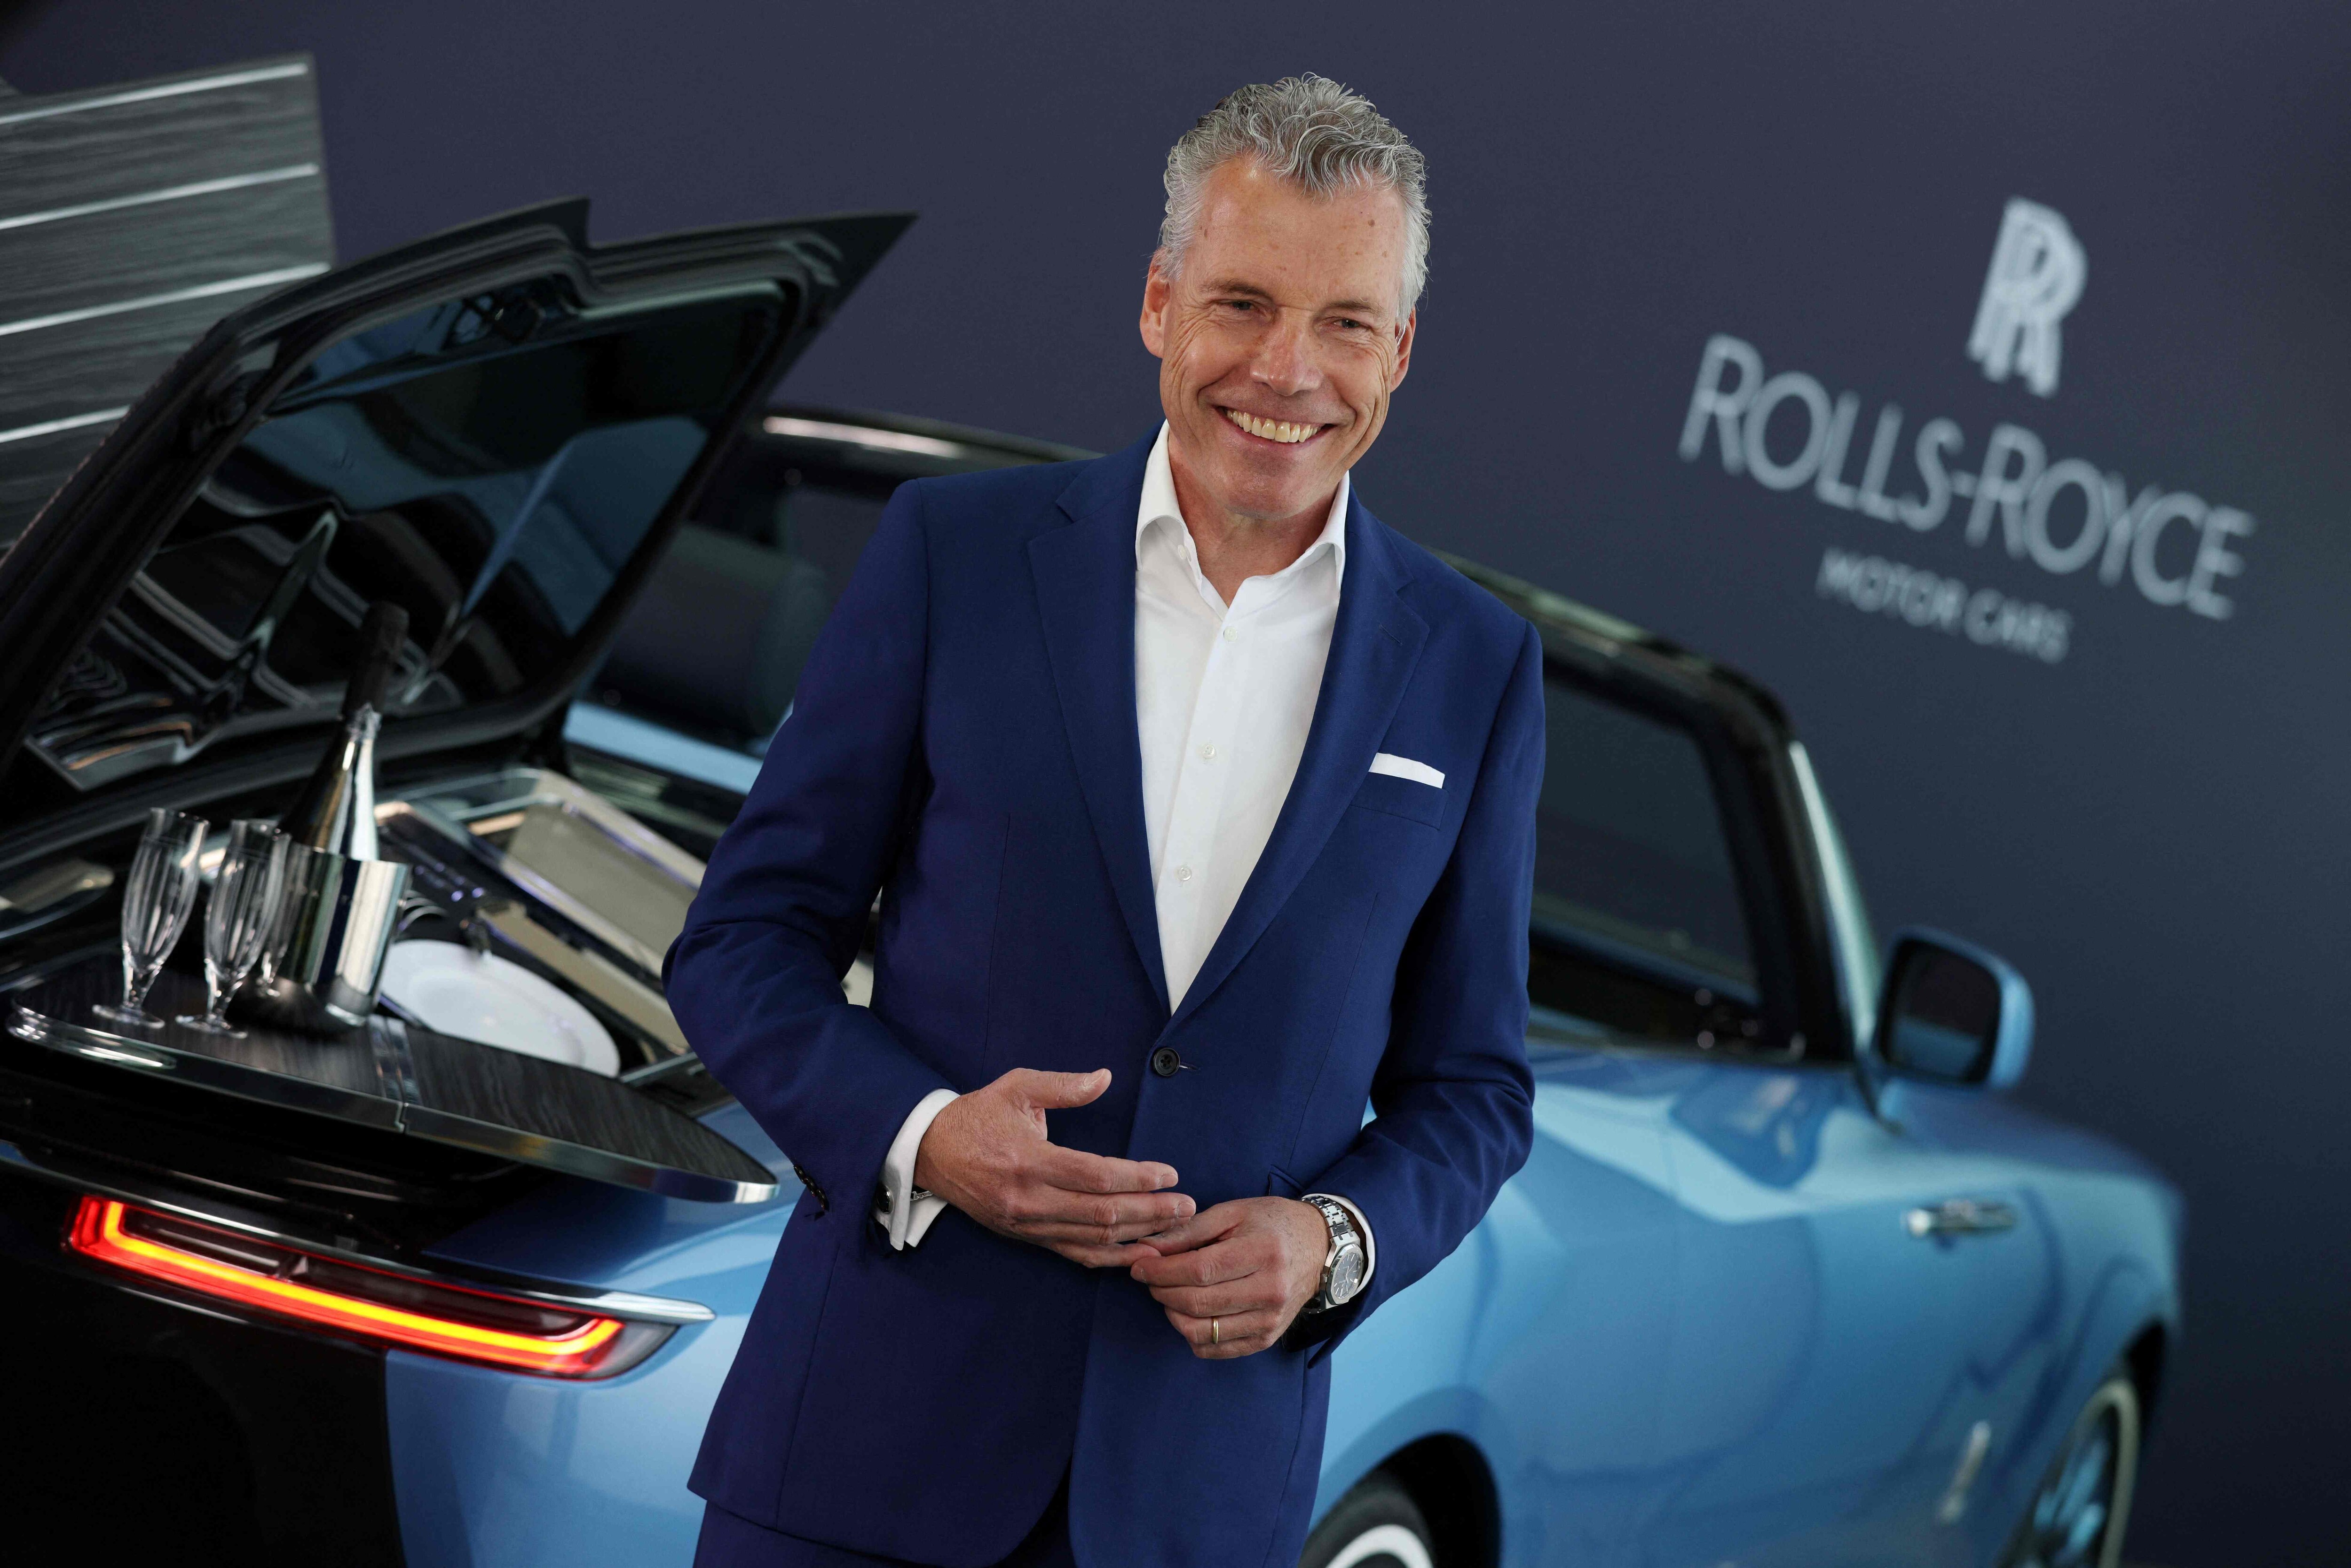 File photo: Rolls-Royce CEO Torsten Muller-Otvos speaks by a Rolls Royce Boat Tail on show at the company's Goodwood headquarters.